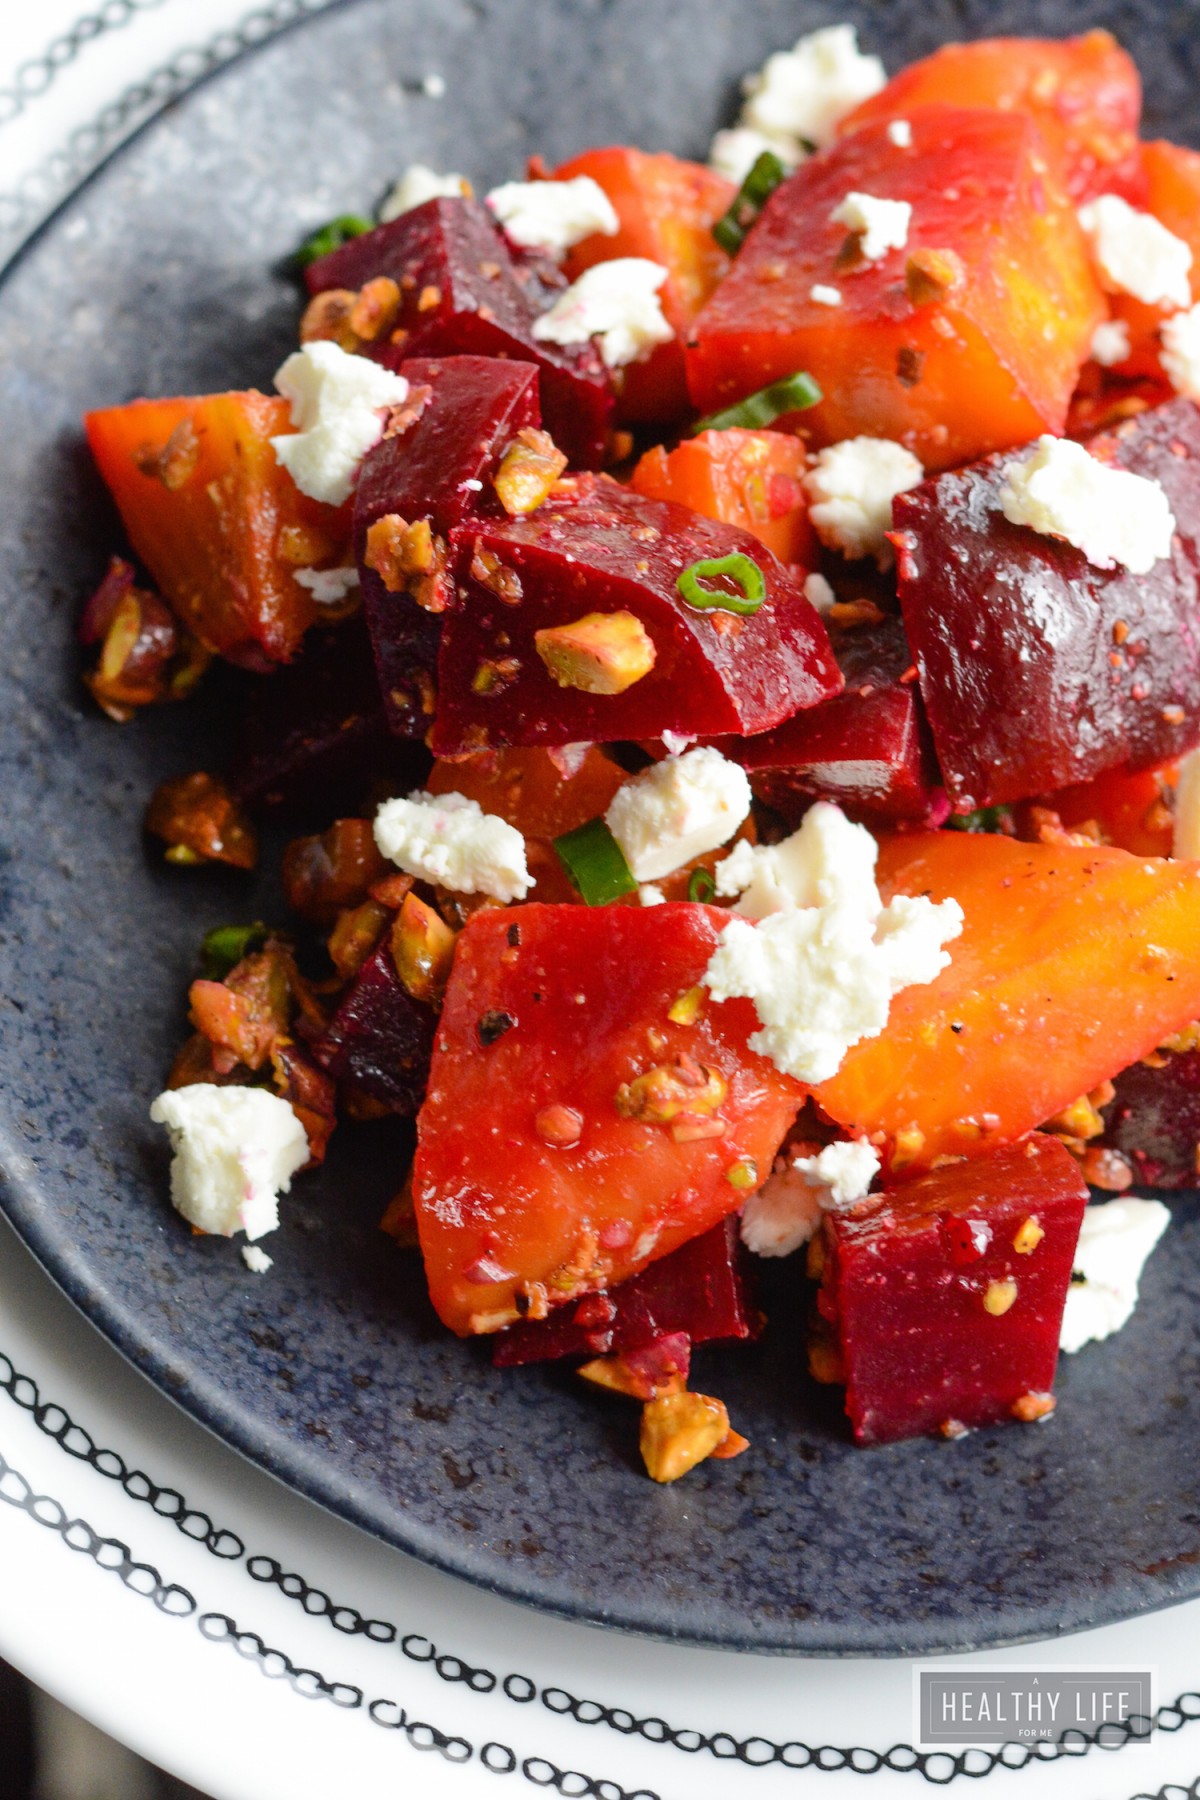 Roasted Beets Pistachio and Goat Cheese Salad